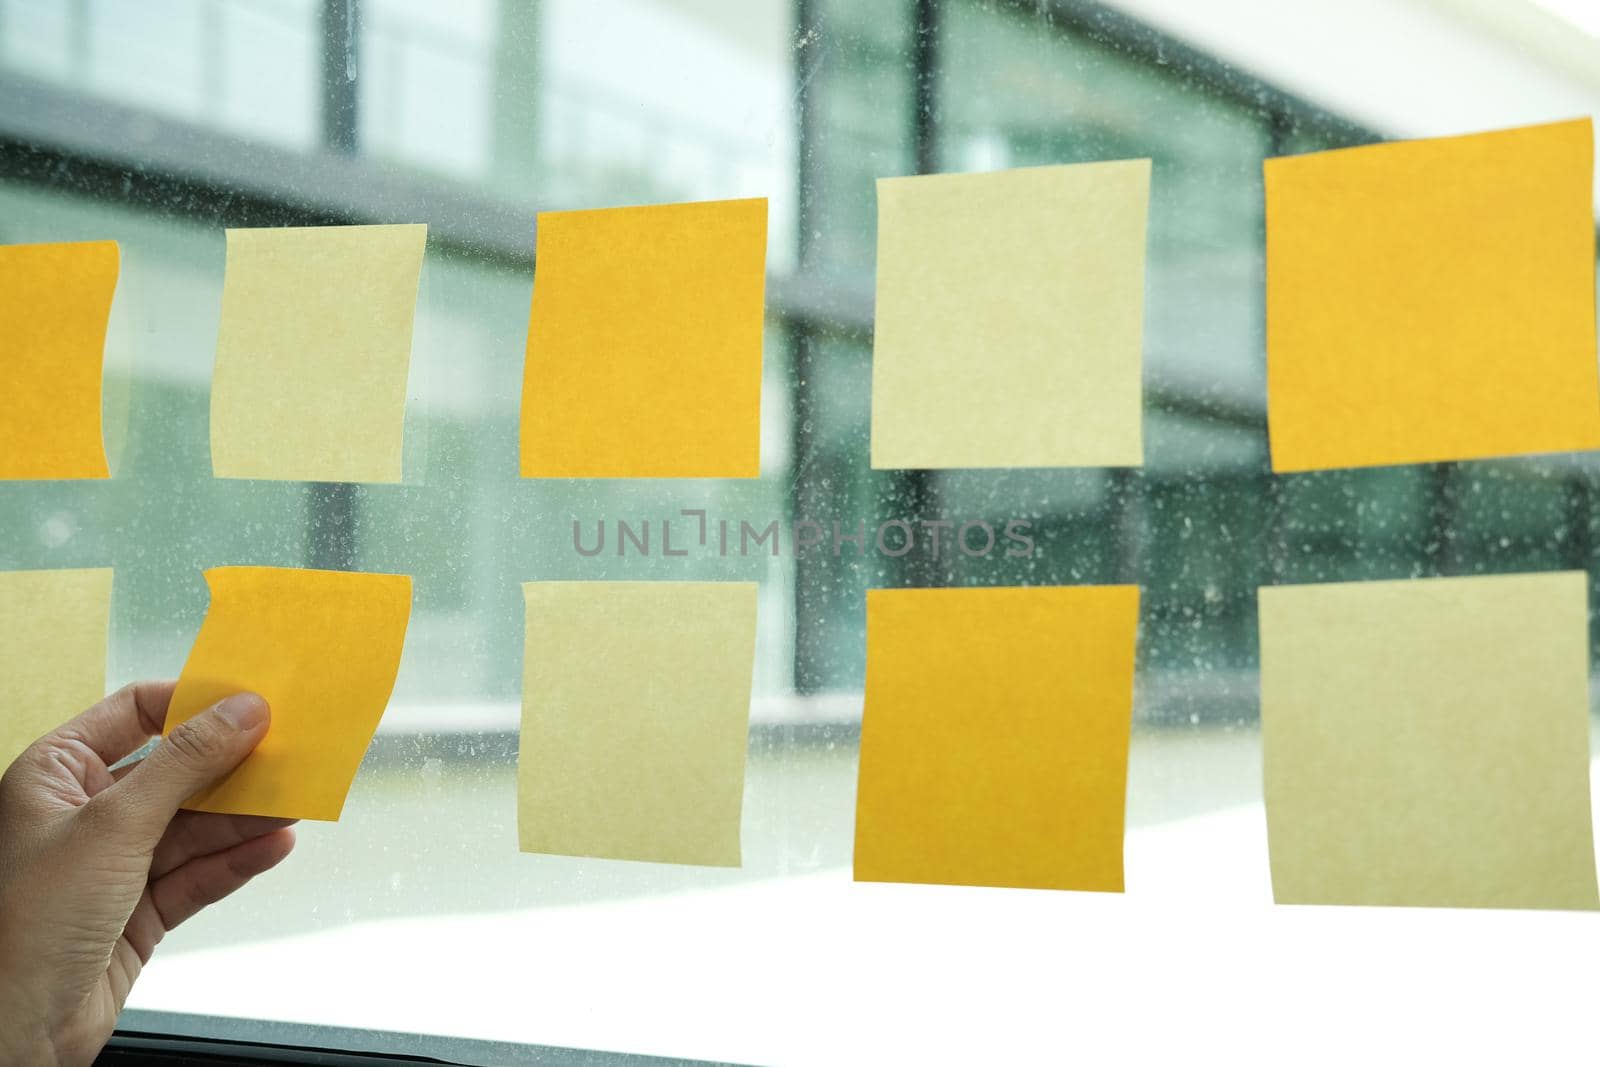 hand hold adhesive notes on glass wall at workplace. Sticky note paper reminder schedule for creative idea & business brainstorming